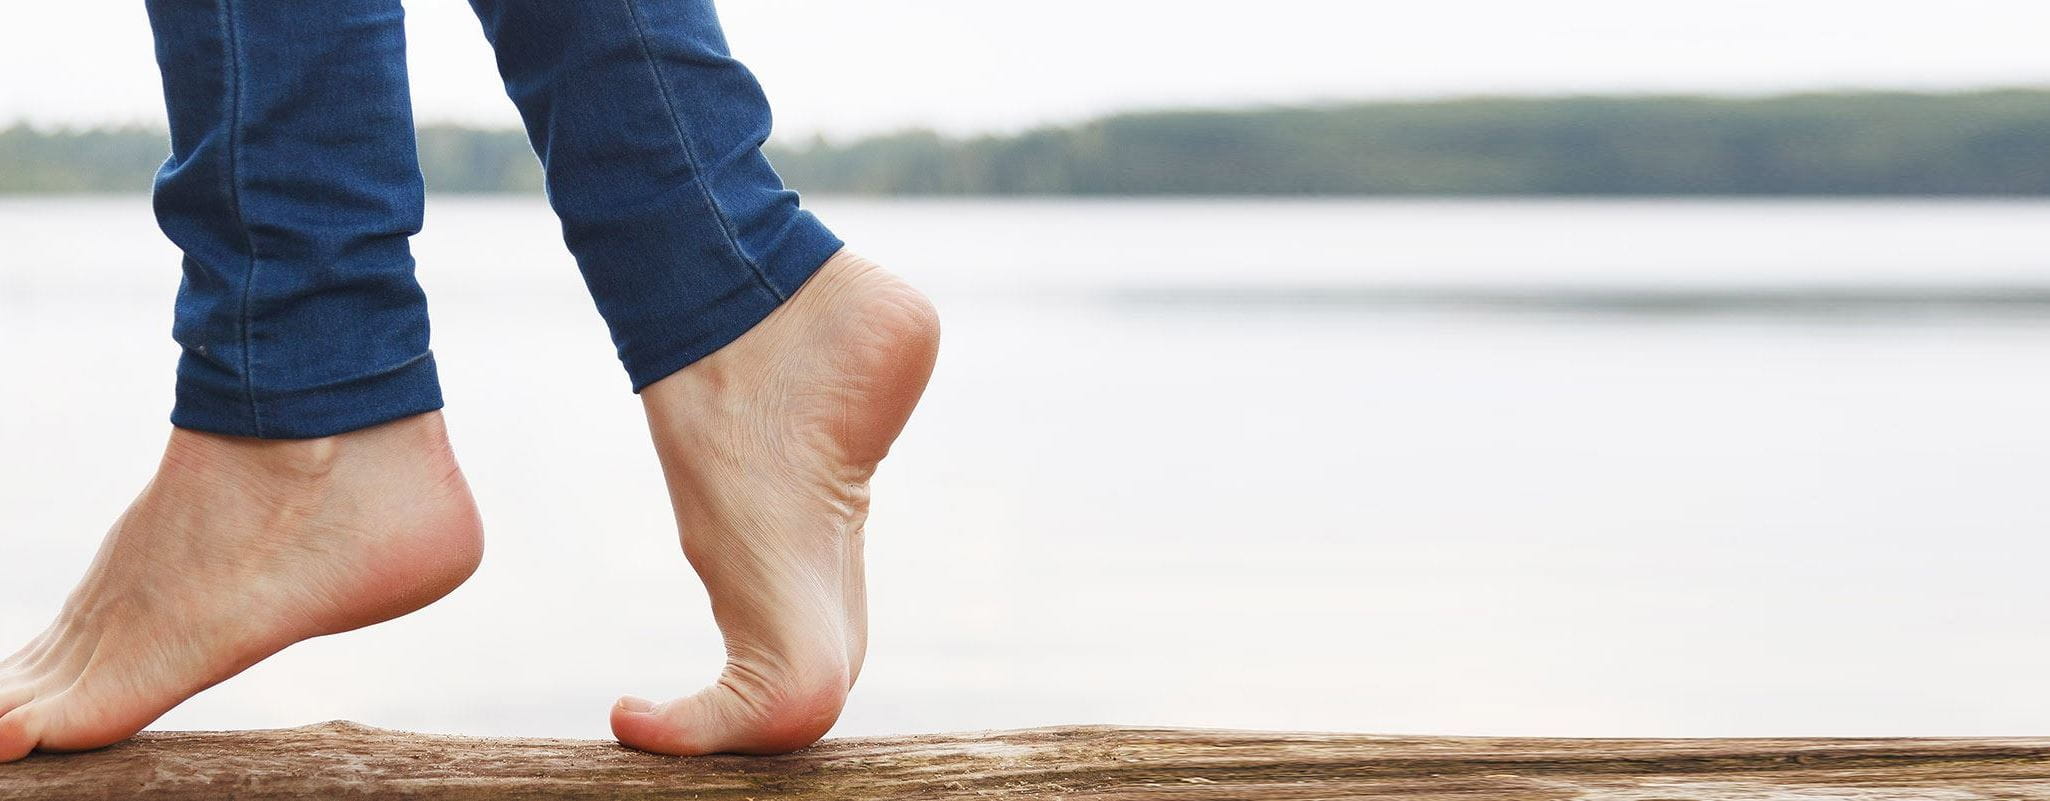 What Causes Cracked Heels